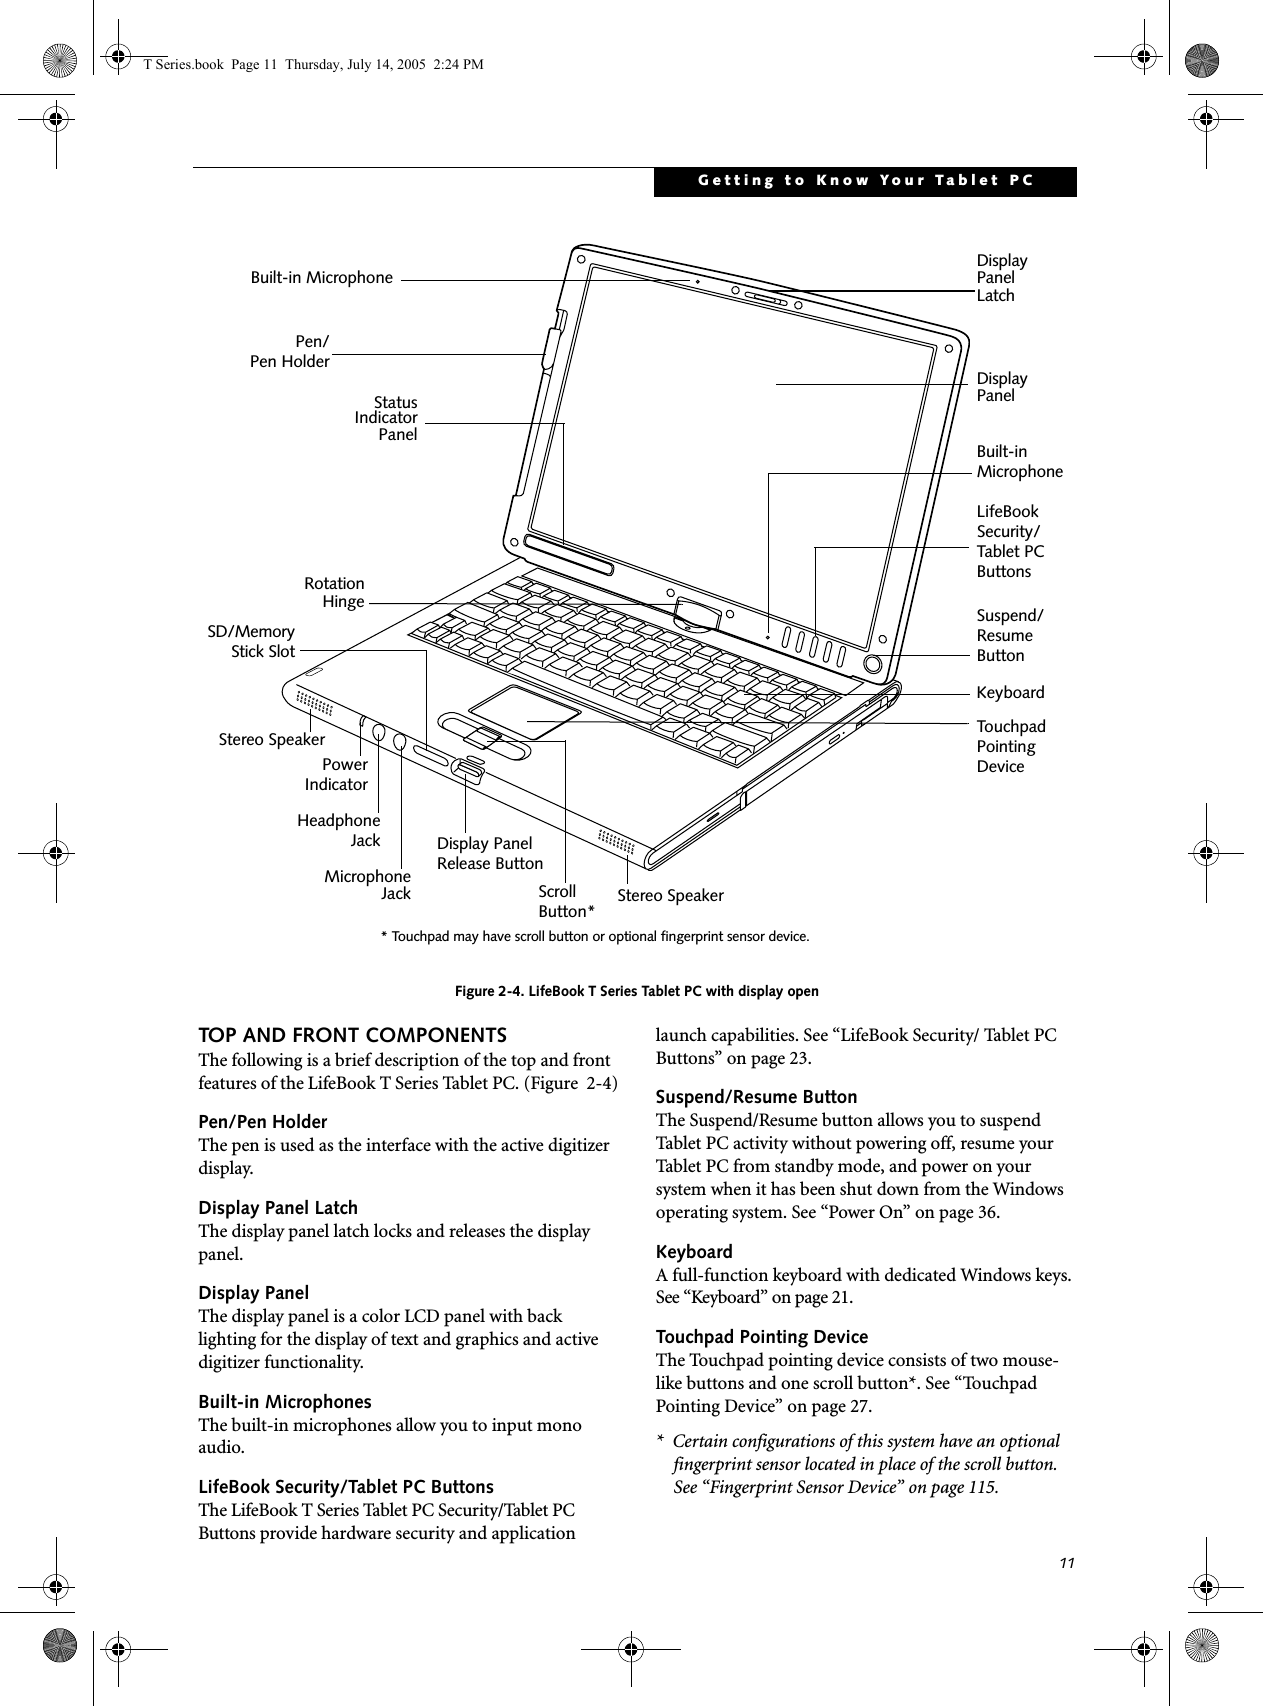 11Getting to Know Your Tablet PCFigure 2-4. LifeBook T Series Tablet PC with display openTOP AND FRONT COMPONENTSThe following is a brief description of the top and front features of the LifeBook T Series Tablet PC. (Figure  2-4)Pen/Pen HolderThe pen is used as the interface with the active digitizer display.Display Panel LatchThe display panel latch locks and releases the display panel.Display PanelThe display panel is a color LCD panel with back lighting for the display of text and graphics and active digitizer functionality. Built-in MicrophonesThe built-in microphones allow you to input mono audio. LifeBook Security/Tablet PC ButtonsThe LifeBook T Series Tablet PC Security/Tablet PC Buttons provide hardware security and application launch capabilities. See “LifeBook Security/ Tablet PC Buttons” on page 23.Suspend/Resume ButtonThe Suspend/Resume button allows you to suspend Tablet PC activity without powering off, resume your Tablet PC from standby mode, and power on your system when it has been shut down from the Windows operating system. See “Power On” on page 36.KeyboardA full-function keyboard with dedicated Windows keys. See “Keyboard” on page 21.Touchpad Pointing DeviceThe Touchpad pointing device consists of two mouse-like buttons and one scroll button*. See “Touchpad Pointing Device” on page 27.*  Certain configurations of this system have an optional fingerprint sensor located in place of the scroll button. See “Fingerprint Sensor Device” on page 115. Display StatusKeyboardLifeBook TouchpadScrollIndicatorPanelPanelDisplay PanelLatchRotationHingeSecurity/PointingDeviceStereo SpeakerPen/Pen HolderTablet PCButtonsStereo SpeakerHeadphoneMicrophoneJackJackSD/MemoryStick SlotSuspend/ResumeButtonBuilt-inMicrophonePowerIndicatorBuilt-in Microphone* Touchpad may have scroll button or optional fingerprint sensor device. Button*Display PanelRelease ButtonT Series.book  Page 11  Thursday, July 14, 2005  2:24 PM